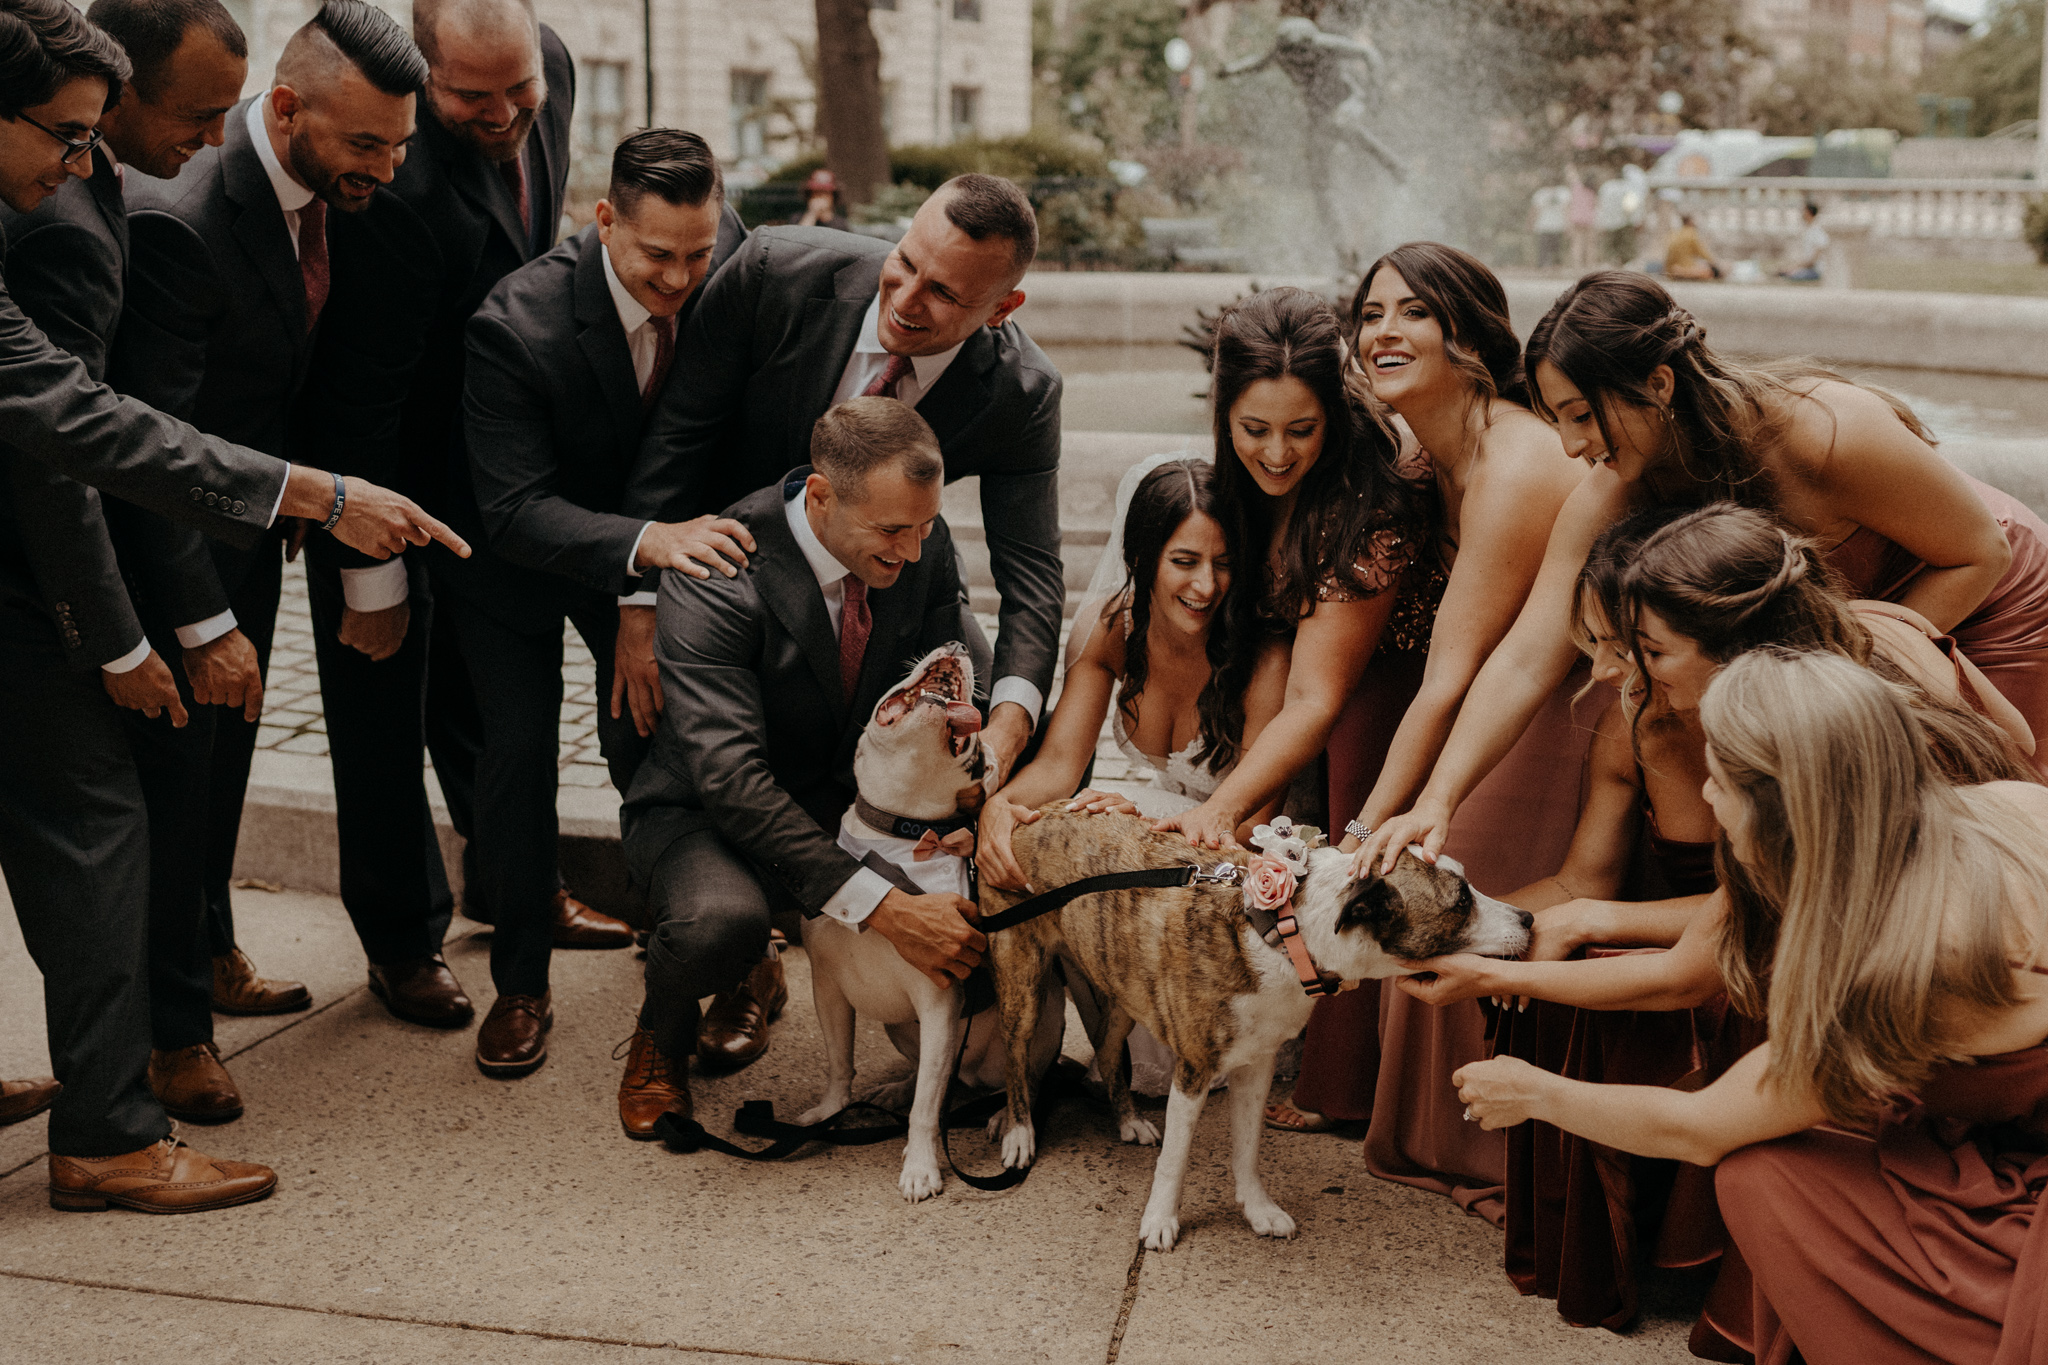 Moody dusty rose & gold wedding at the Mt Washington Mill Dye House with velvets and satin textures, baltimore elopement photographer Victoria Selman